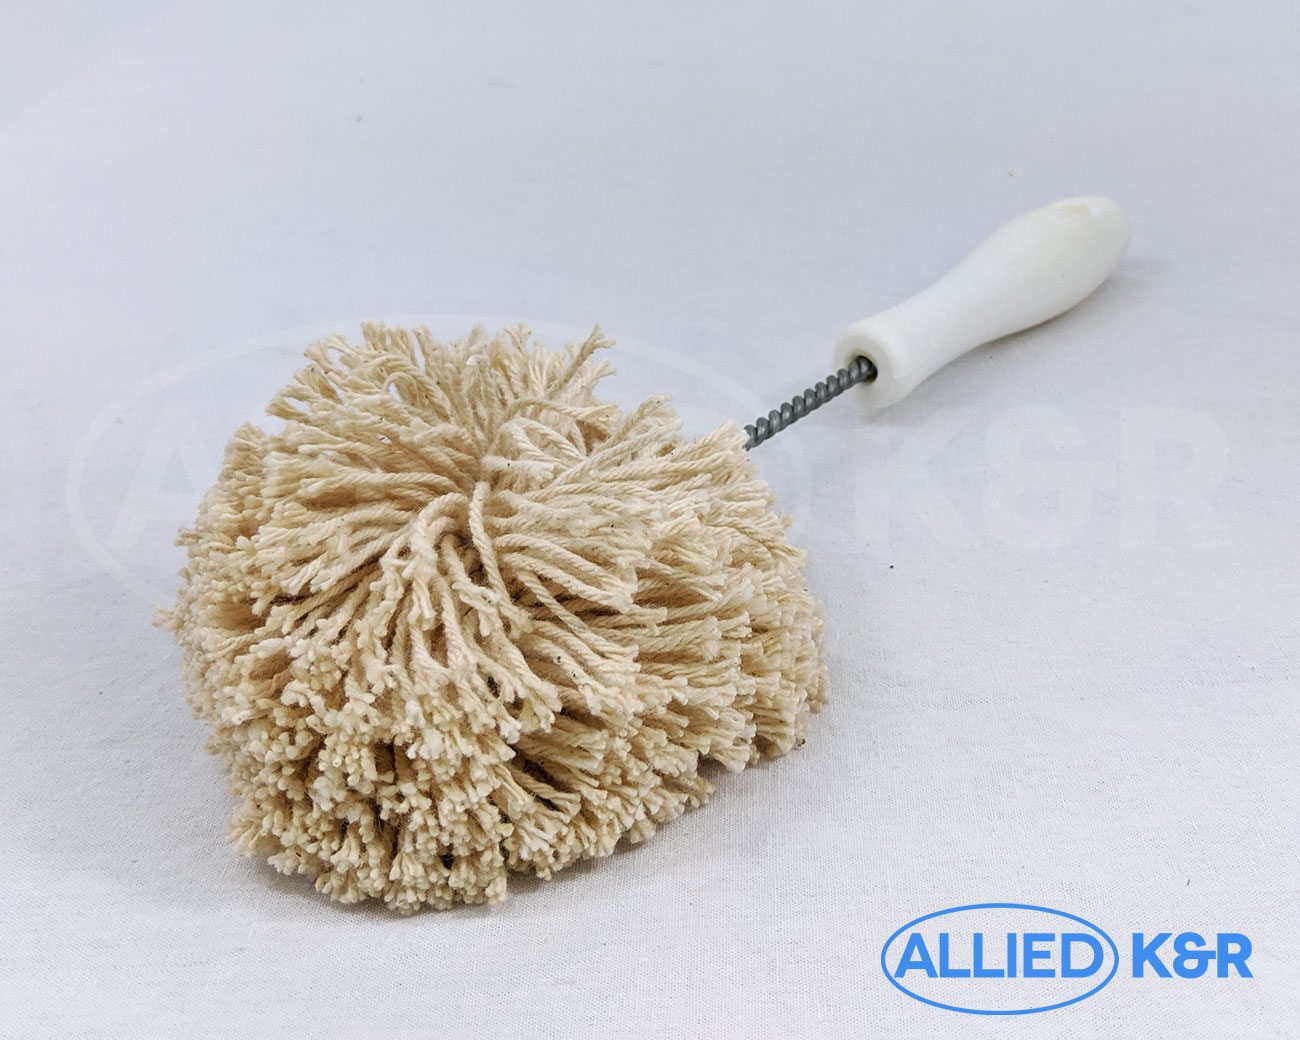 Stock Food Service Brushes